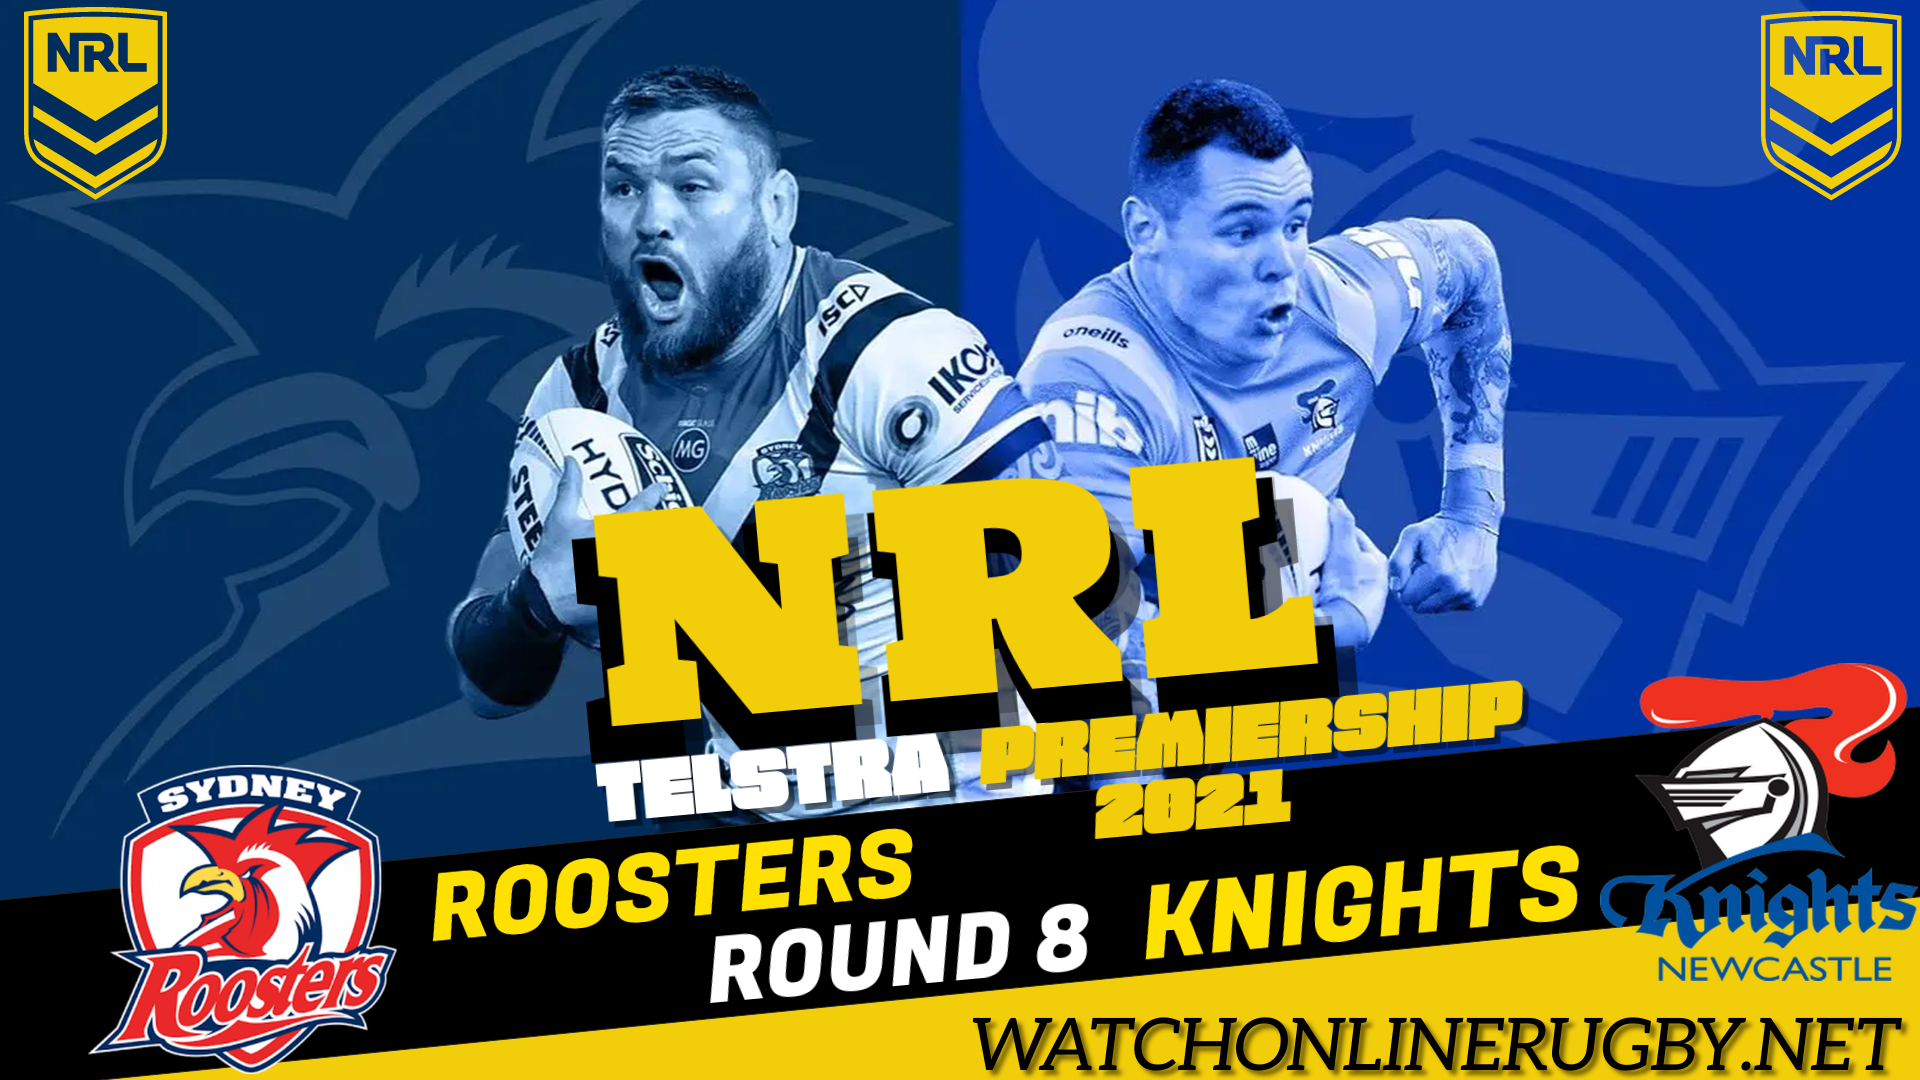 Roosters VS Knights Live Stream